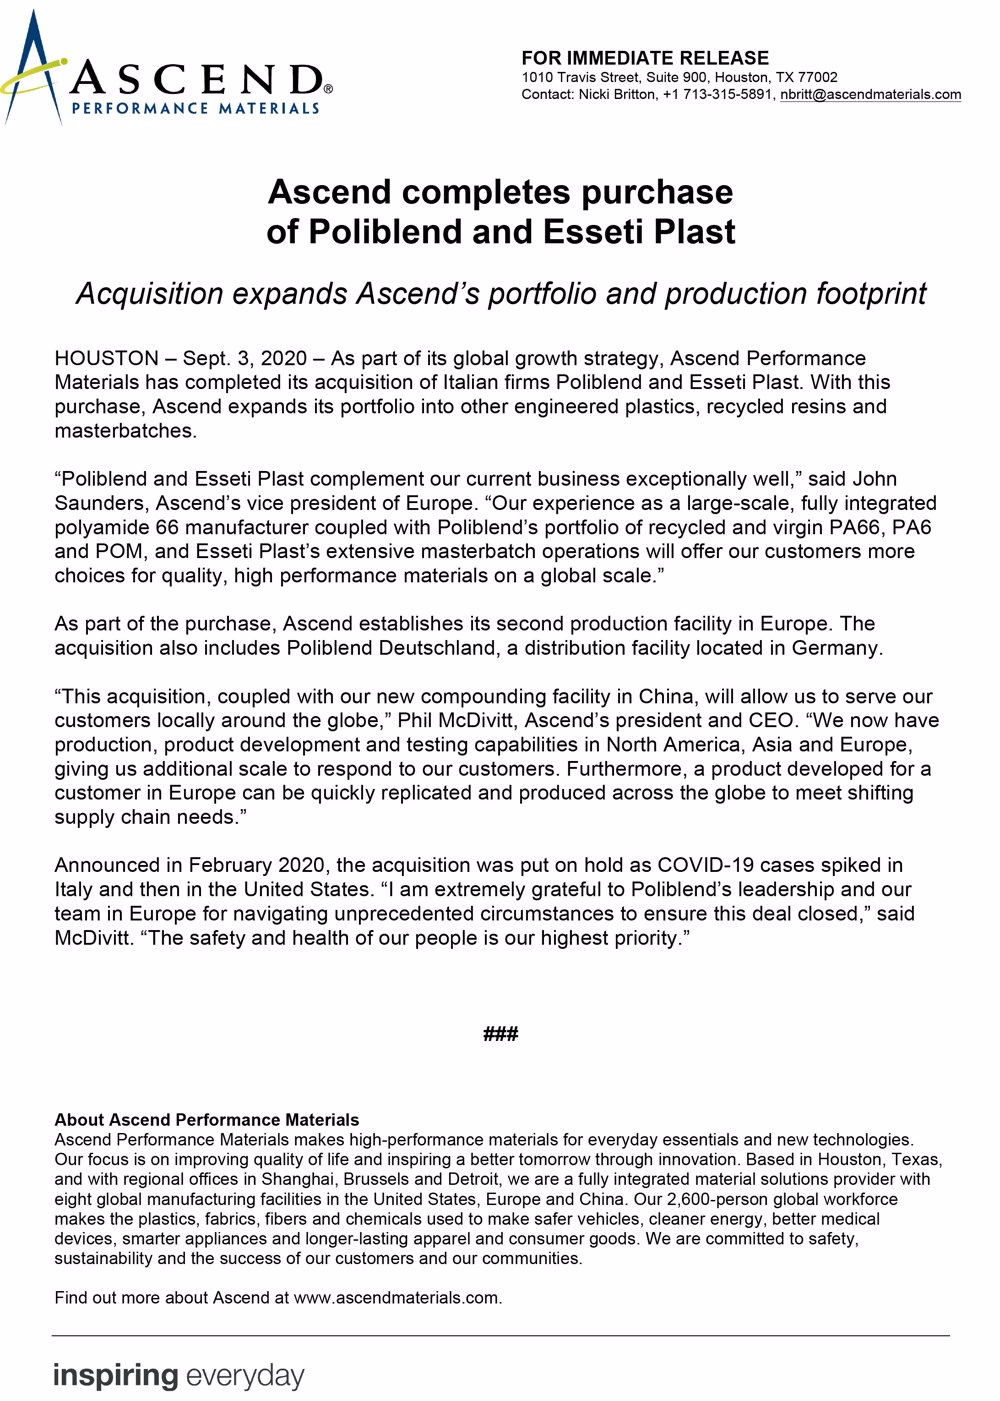 Ascend completes purchase of Poliblend and Essetiplast